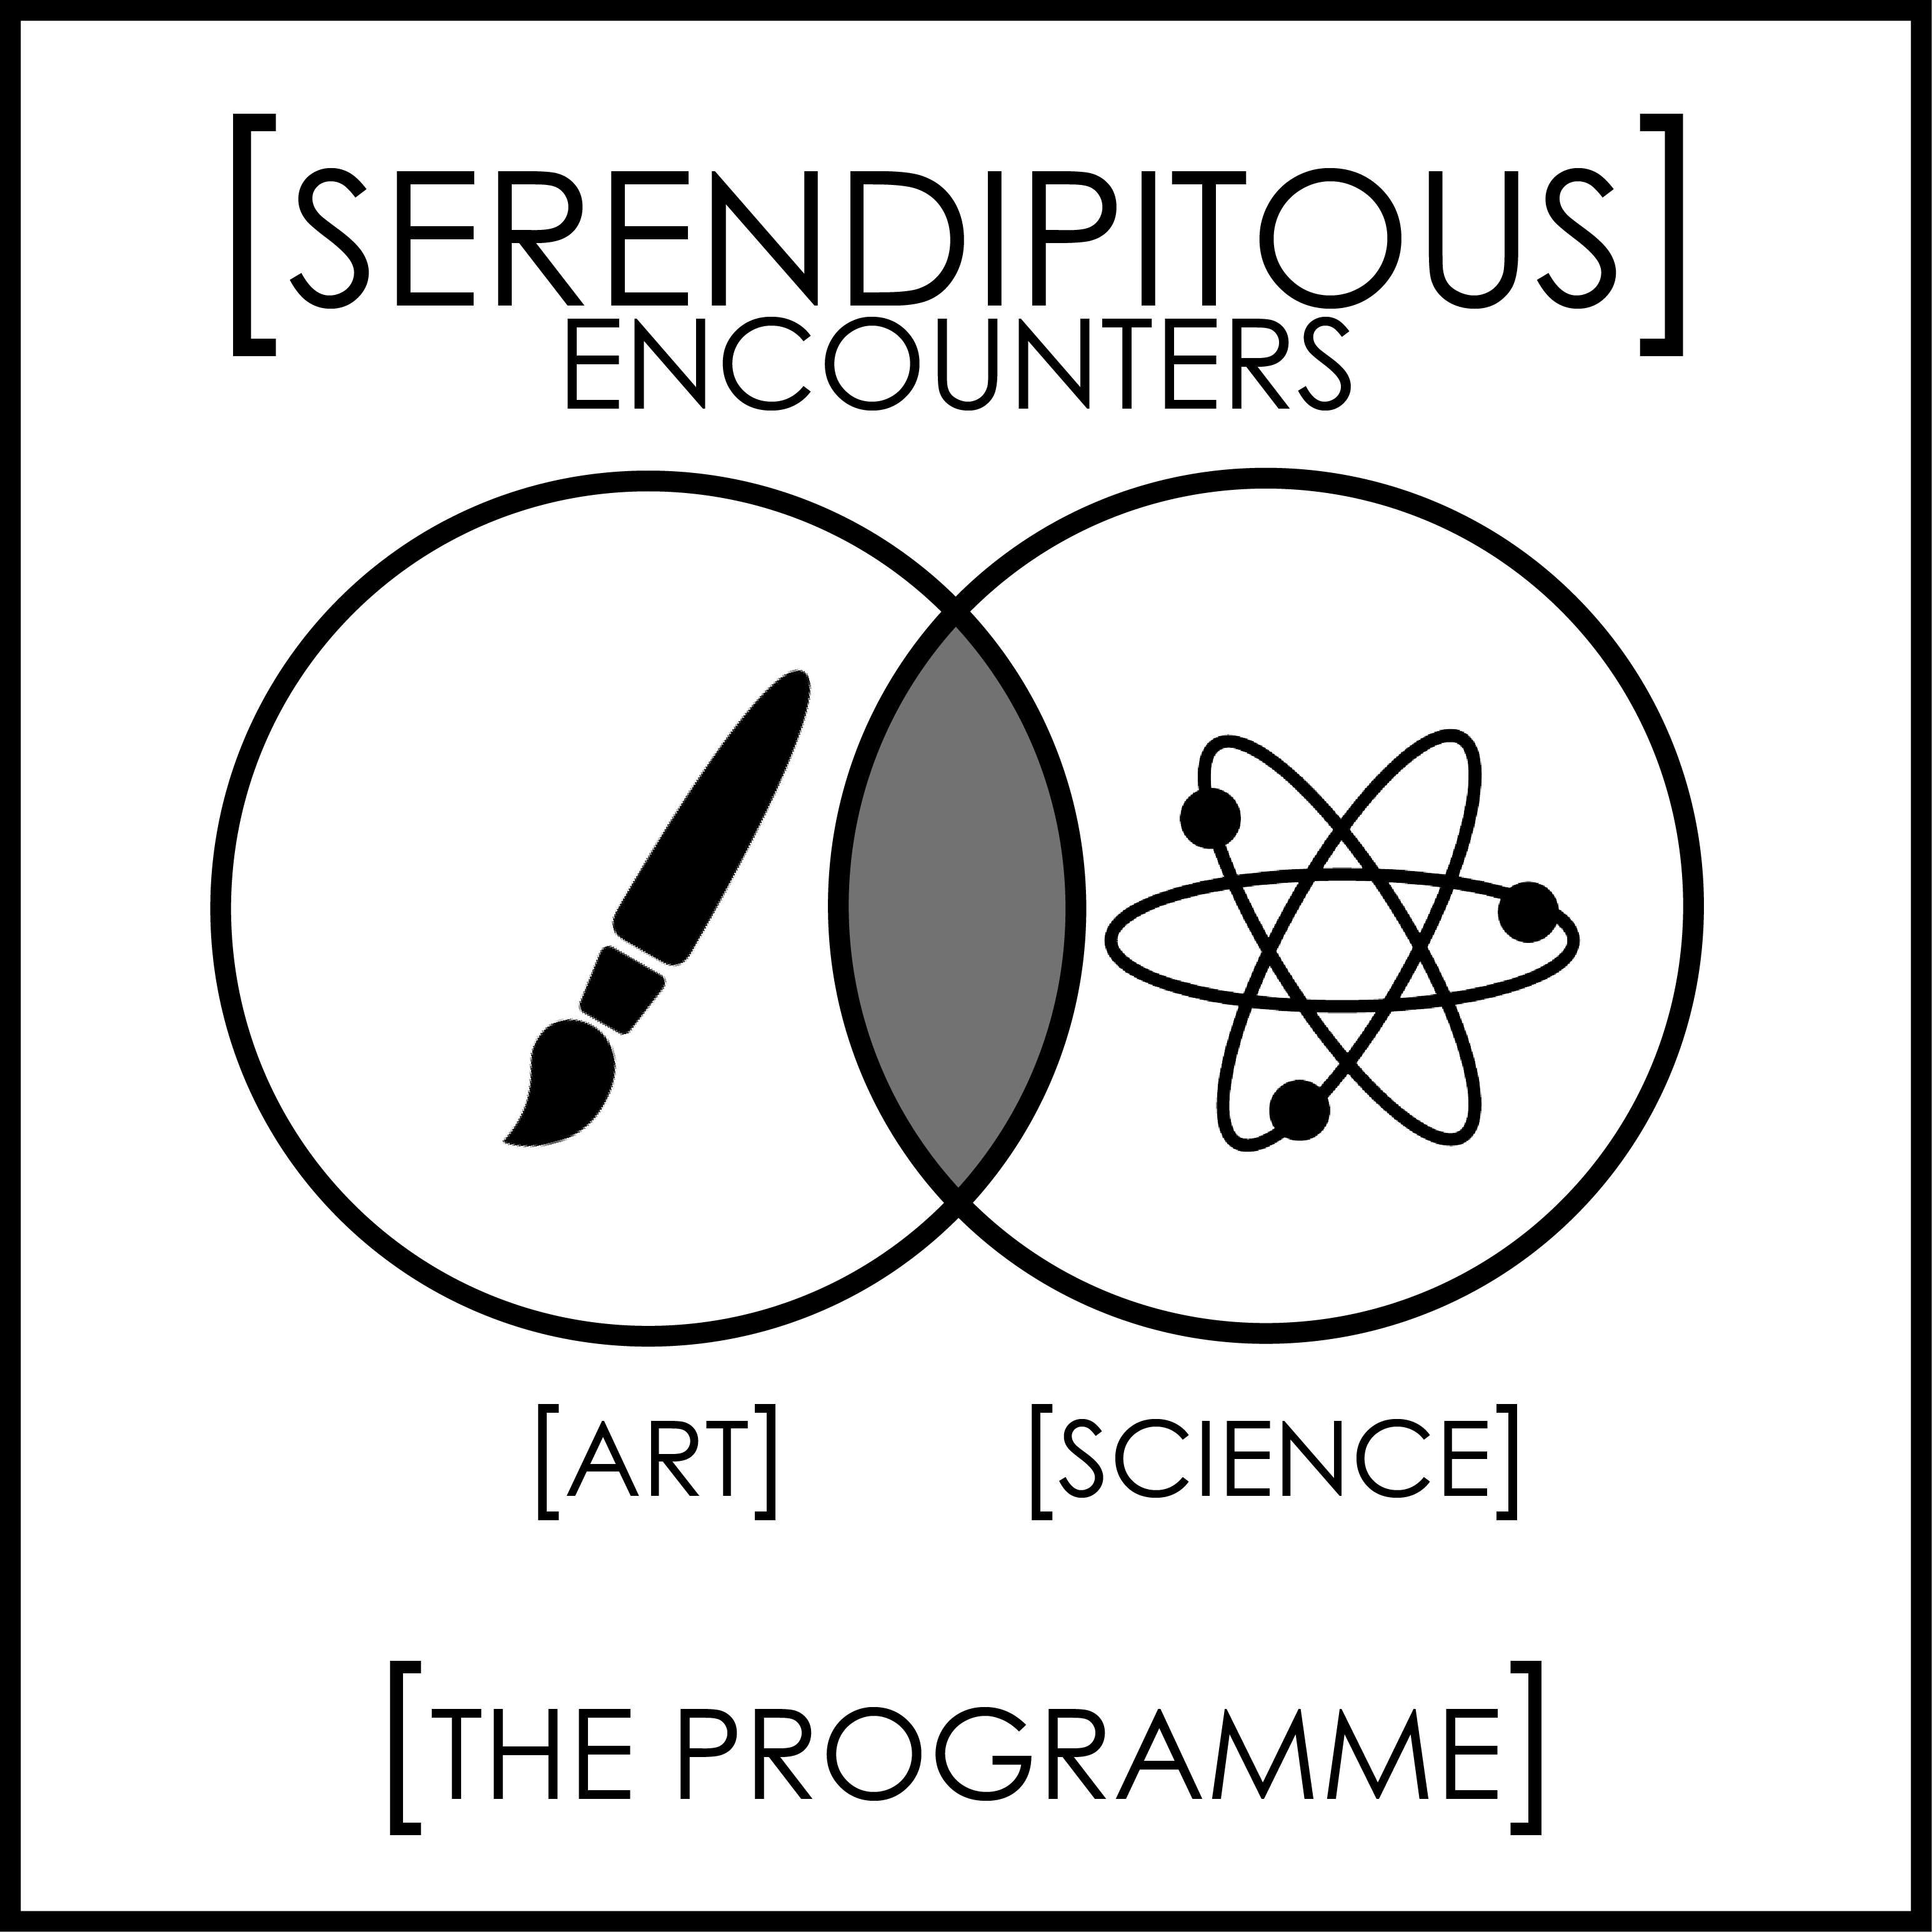 The Programme diagram showing the intersection between Art and Science